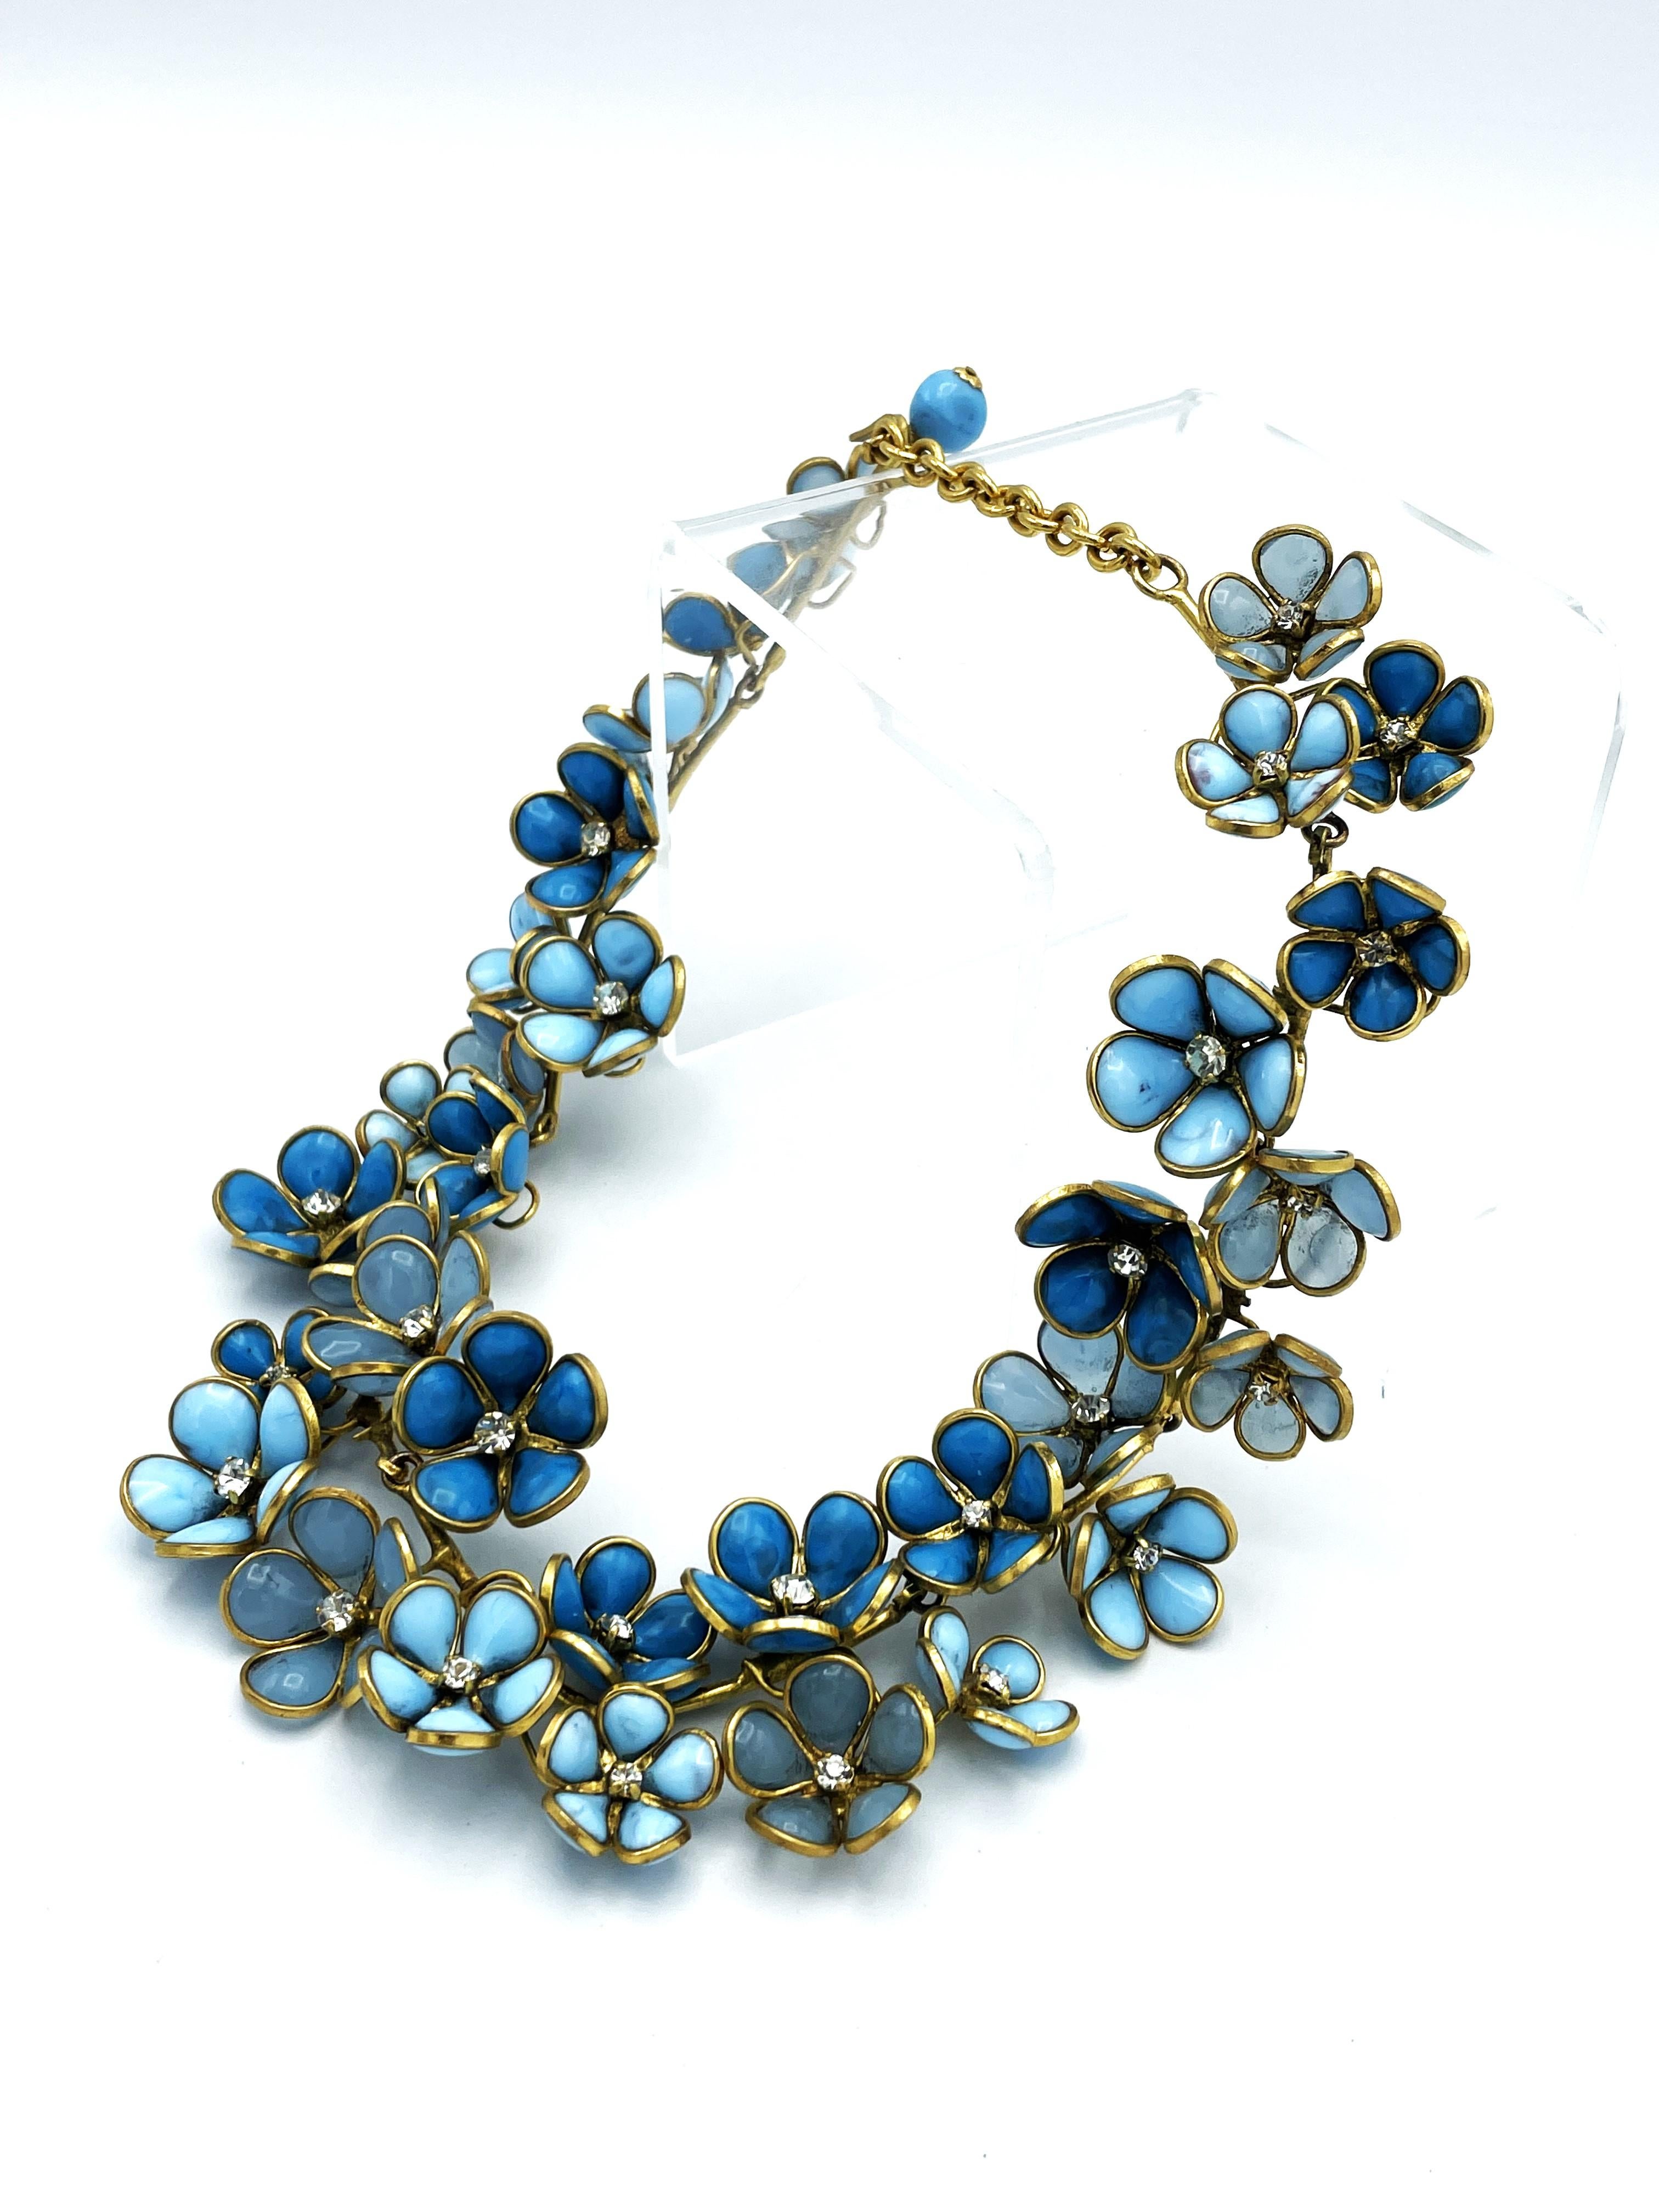 Necklace of many blue glass flowers from Gripoix in the style of Chanel For Sale 5